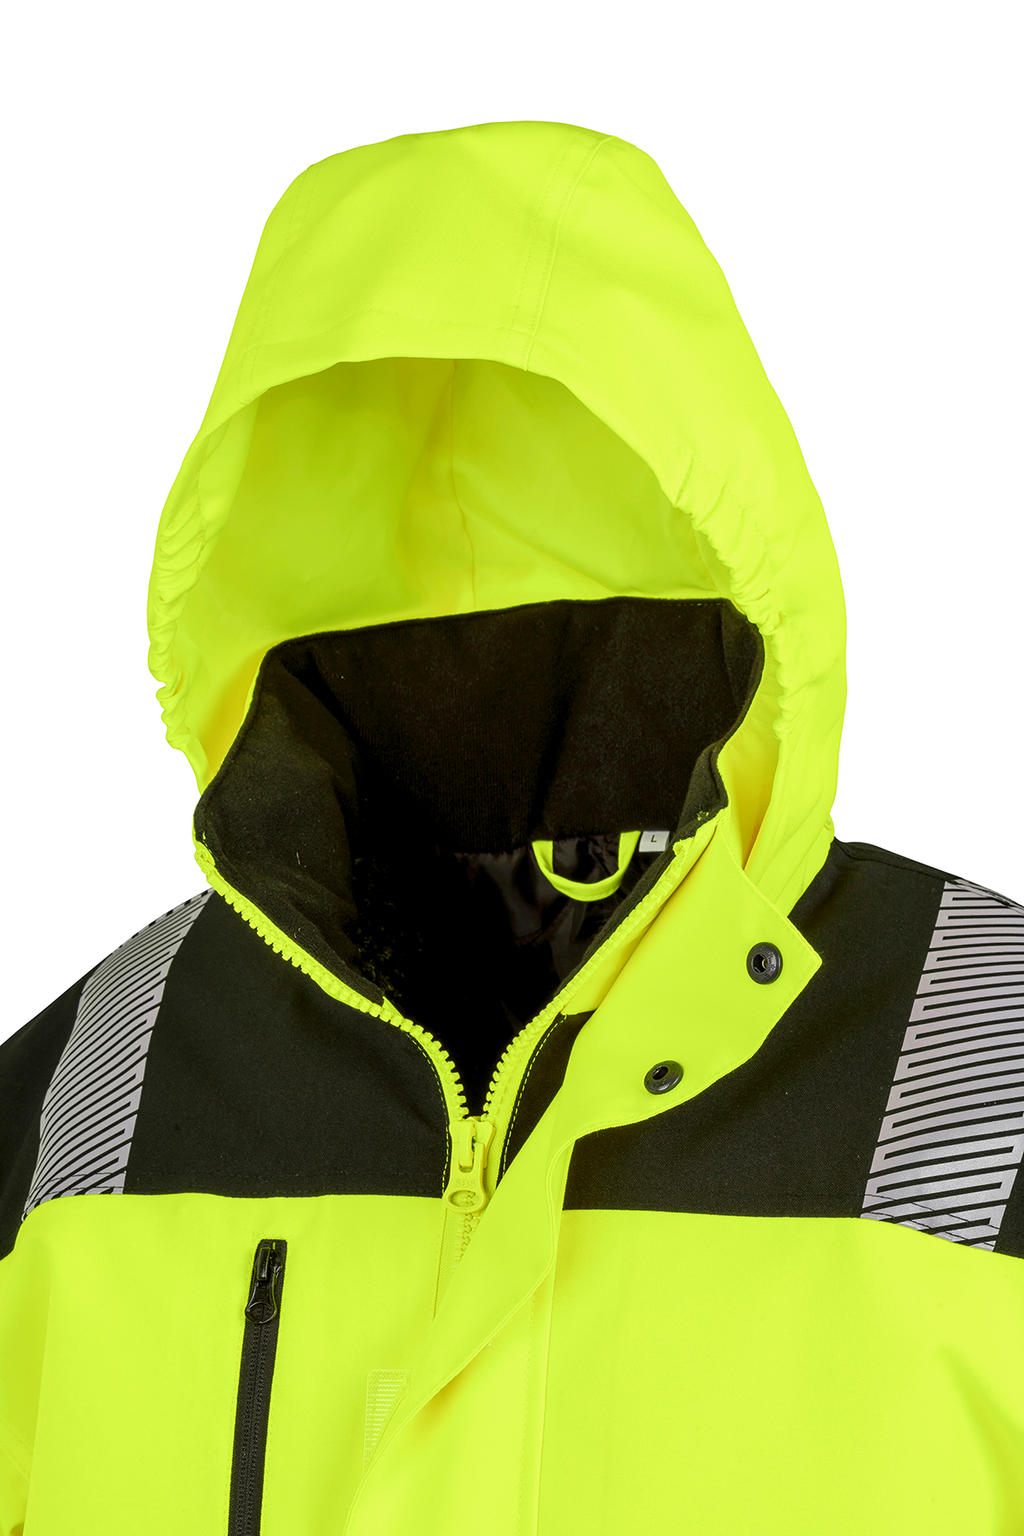  Printable Waterproof Softshell Safety Coat in Farbe Fluorescent Orange/Black